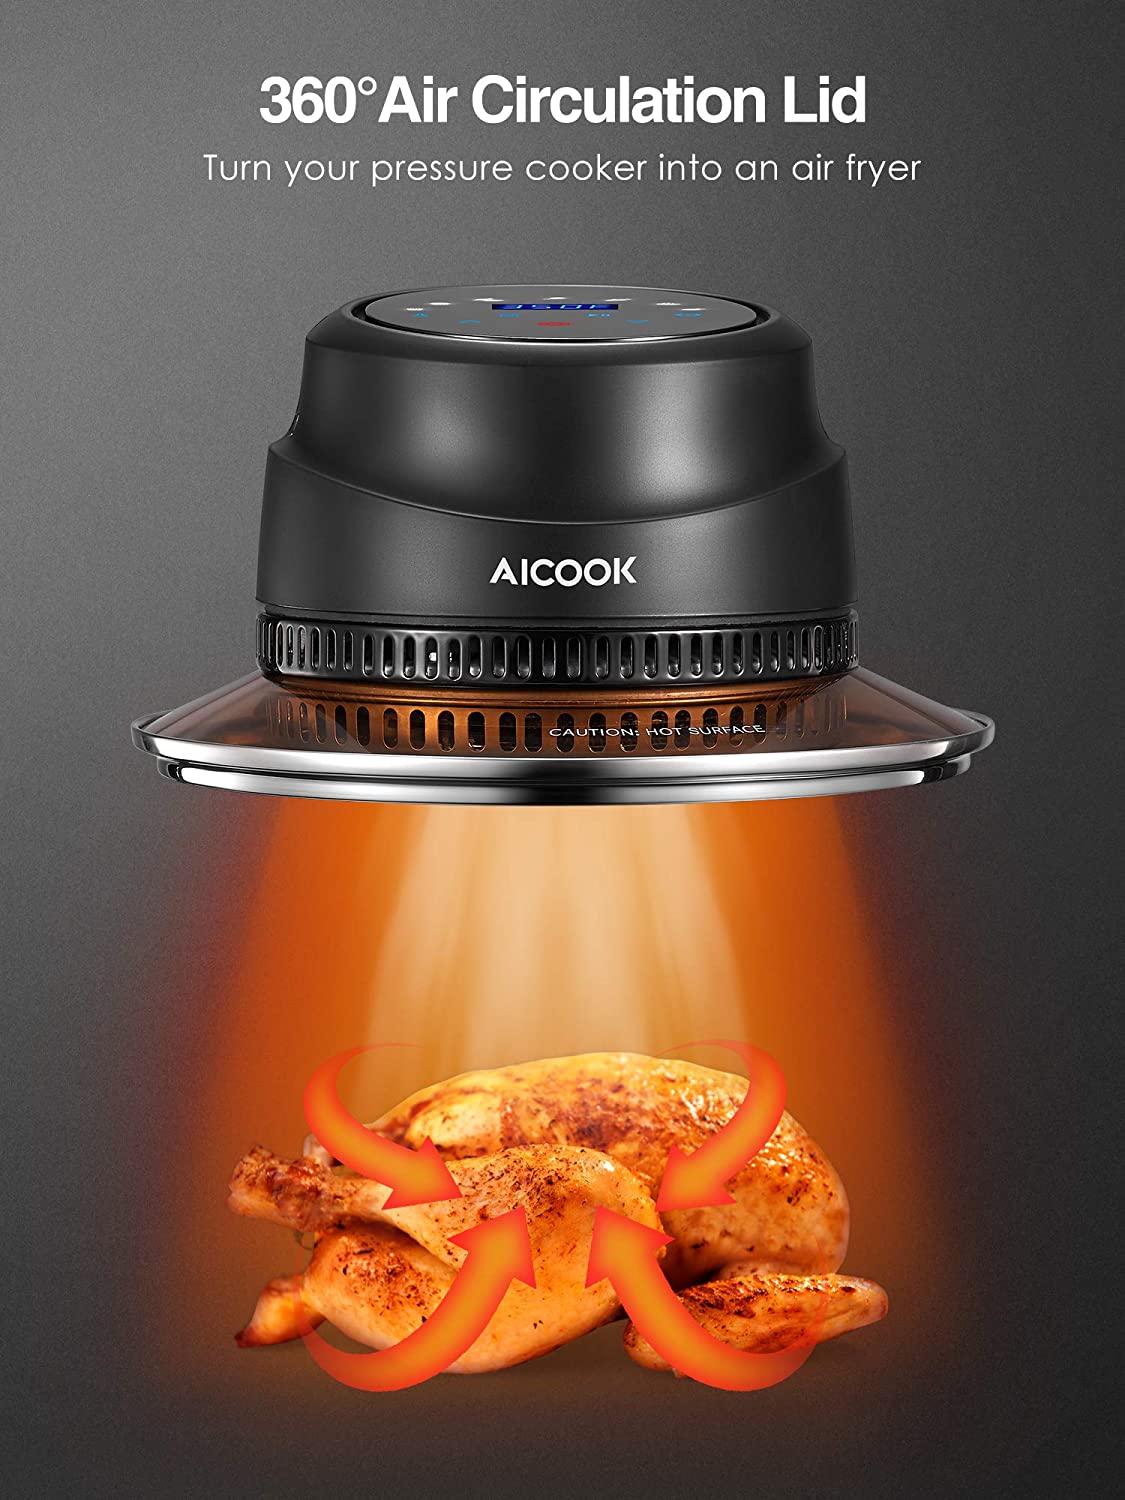 Air Fryer Lid for Instant Pot 6Qt/8Qt, 7 in 1 with LED Touchscreen, Turn  Your Pressure Cooker Into Air Fryer in Seconds, Air Fryer Accessories and